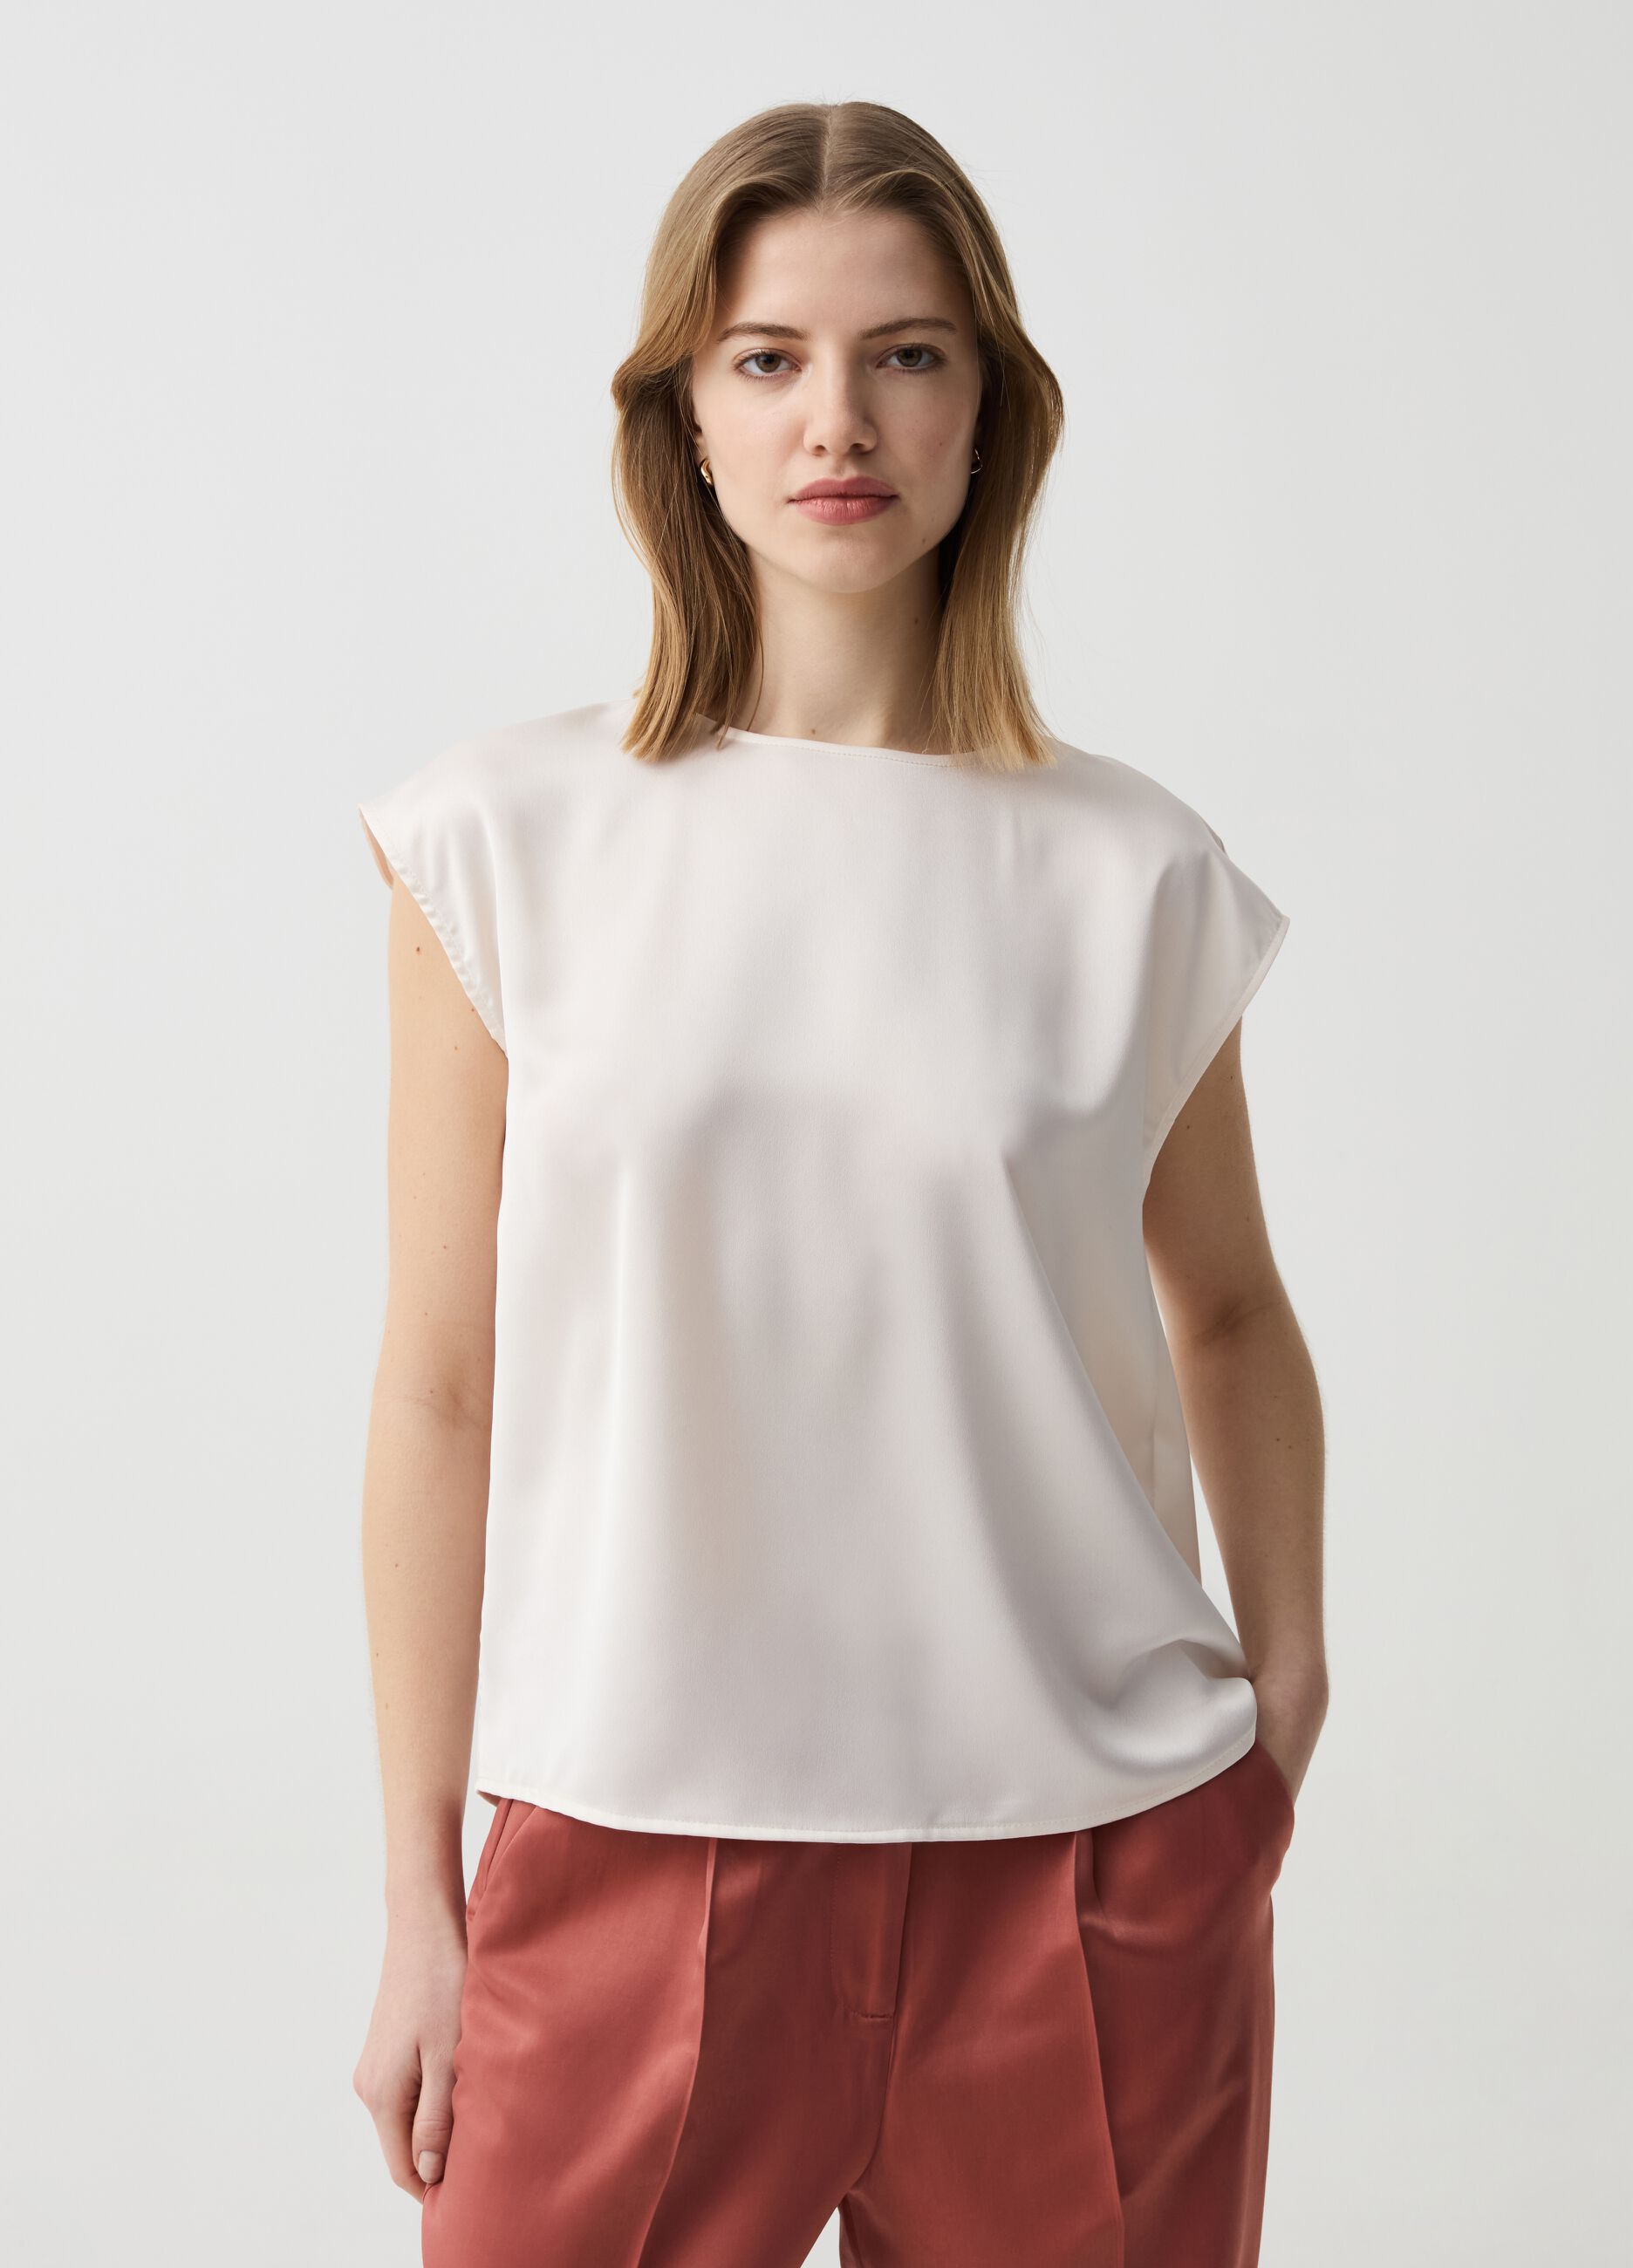 Satin blouse with short sleeves